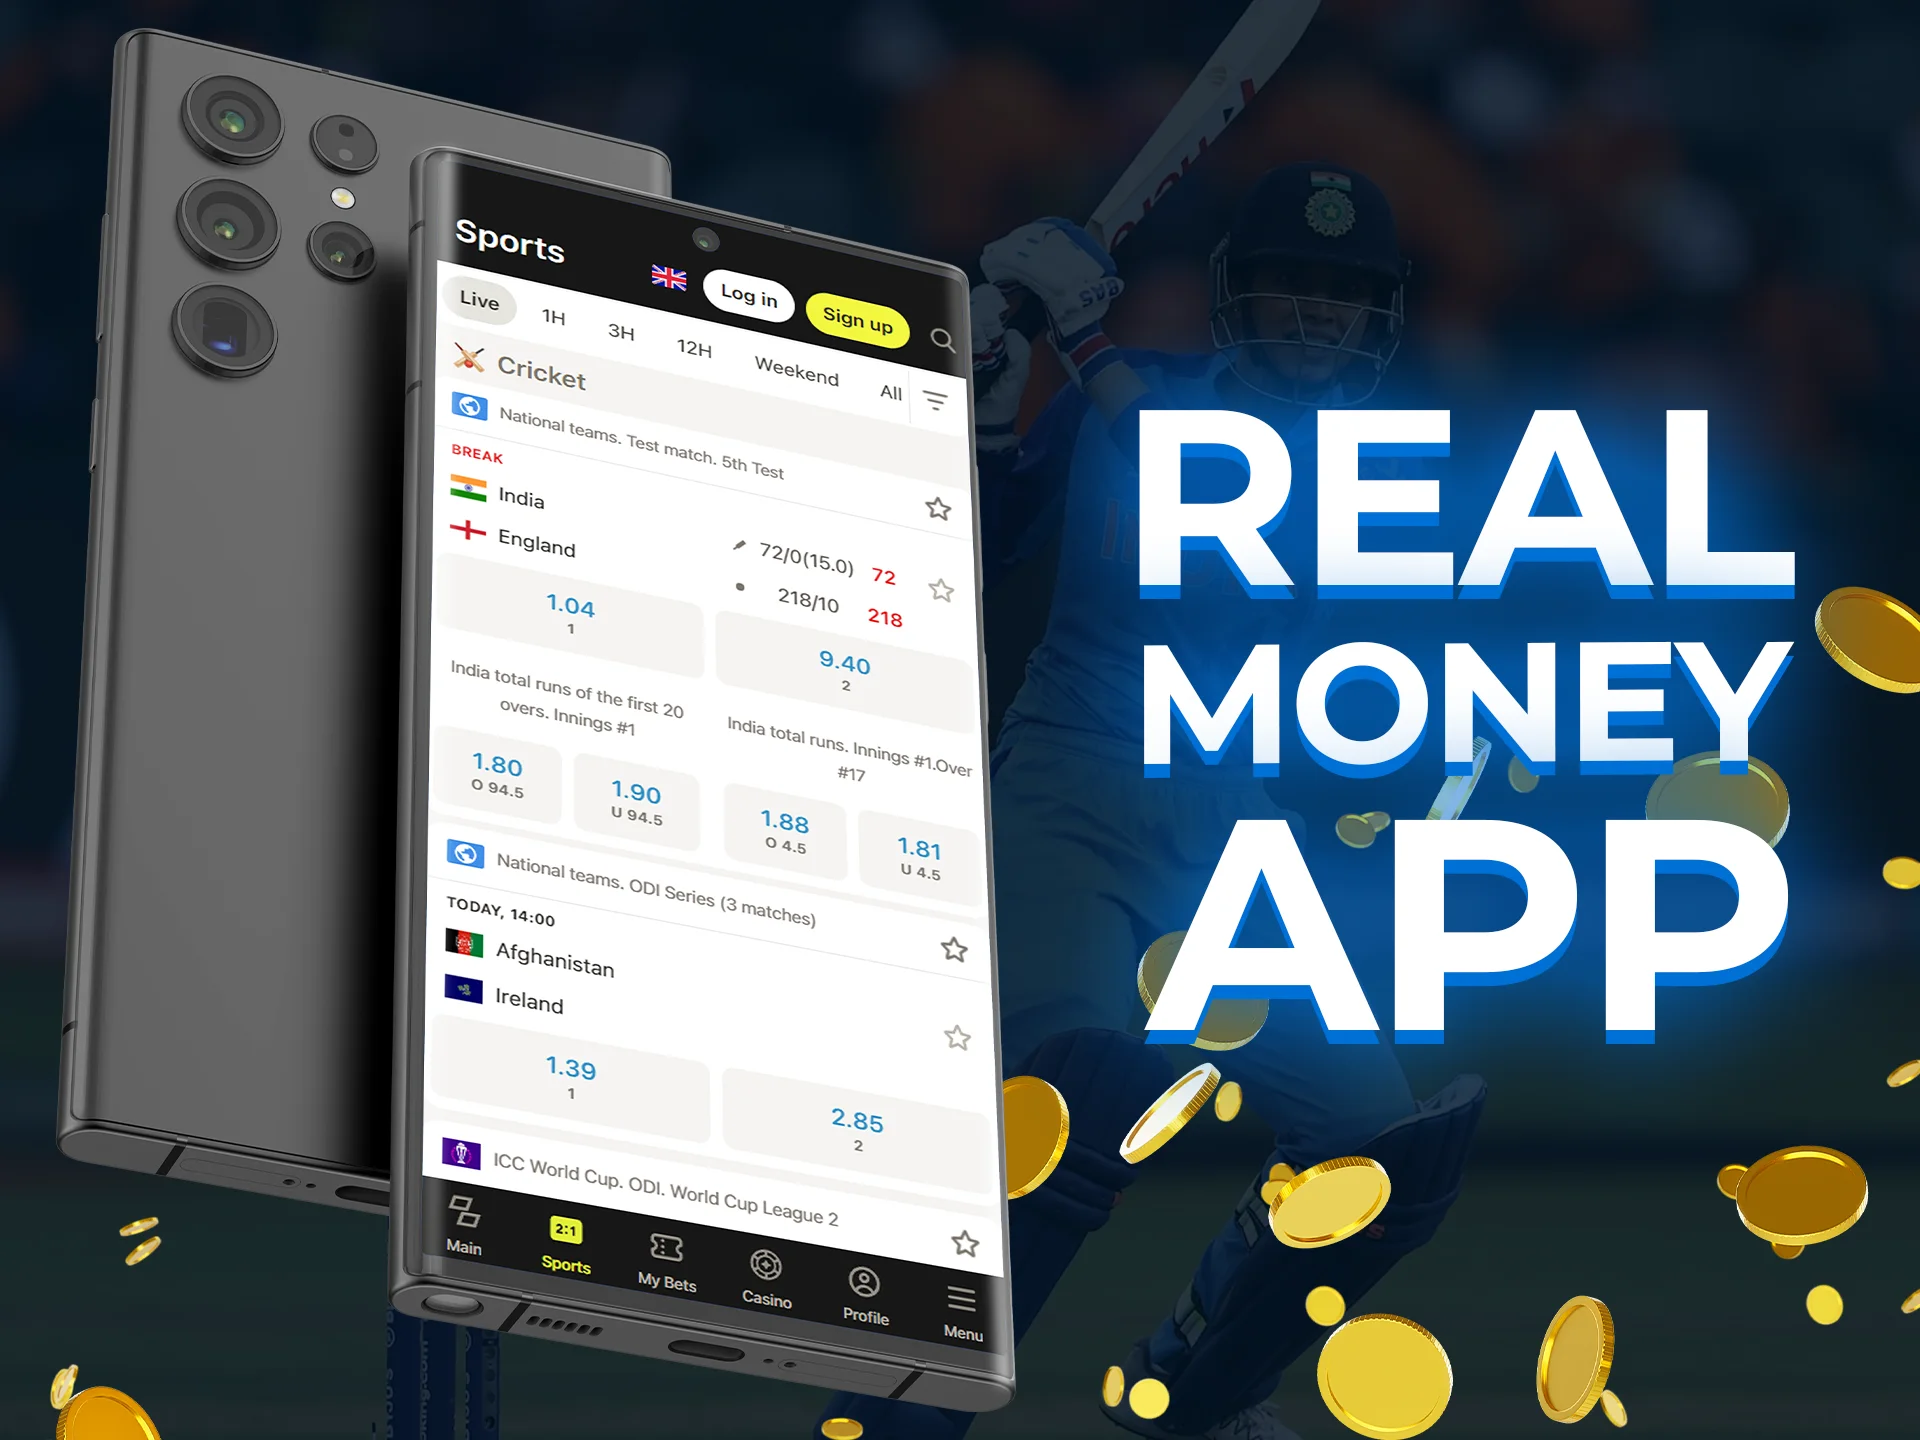 The Parimatch app is the best for real money cricket betting.